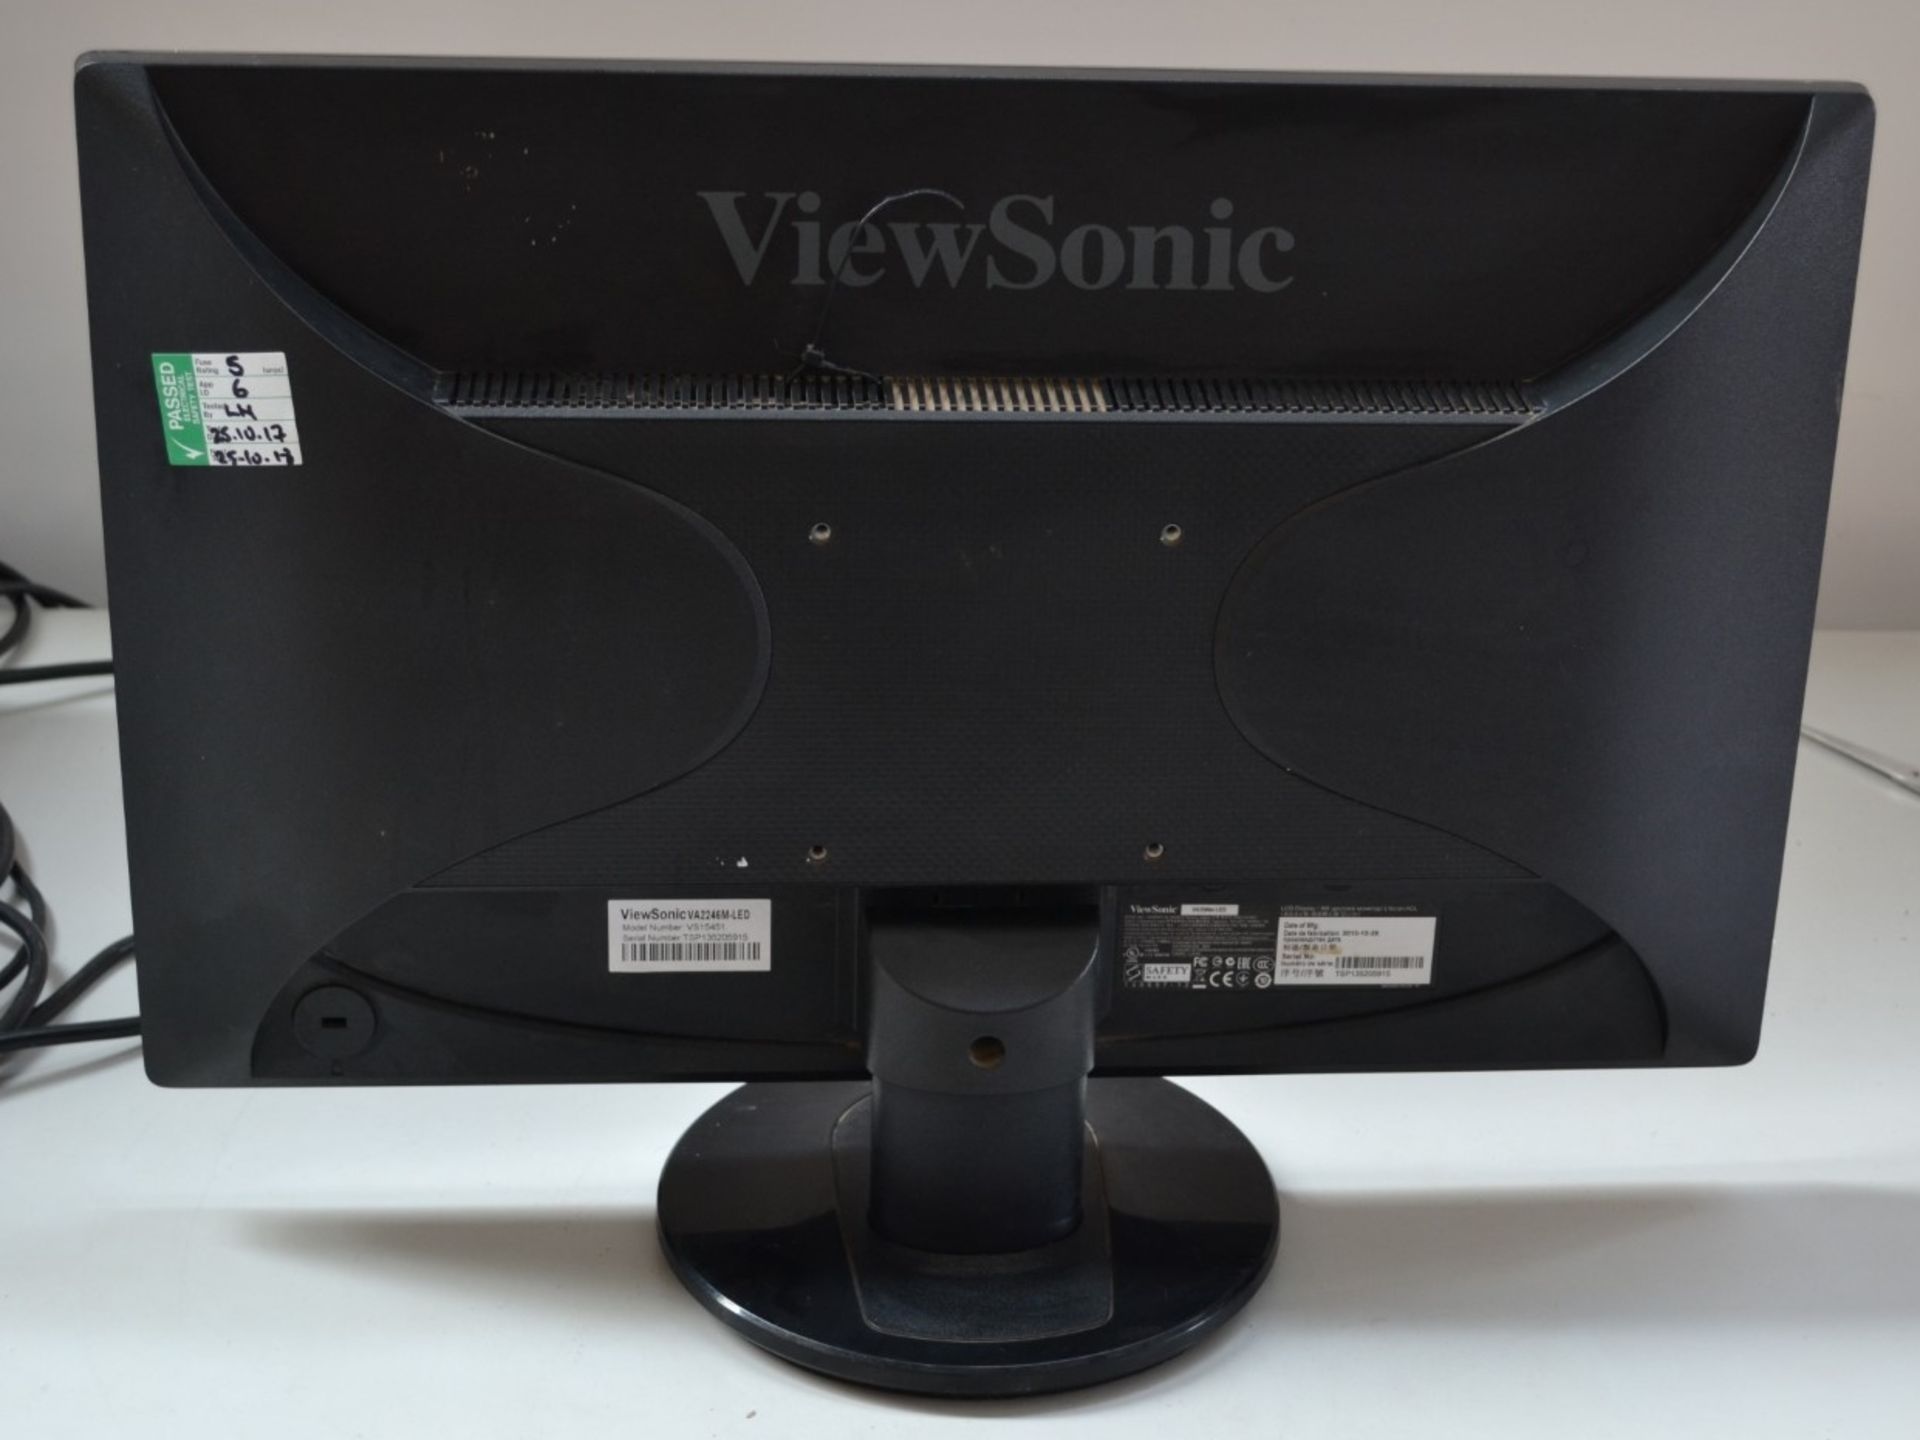 2 x View Sonic VA2246MLED 22" Widescreen PC Monitors - Ref J2255 - Image 2 of 3